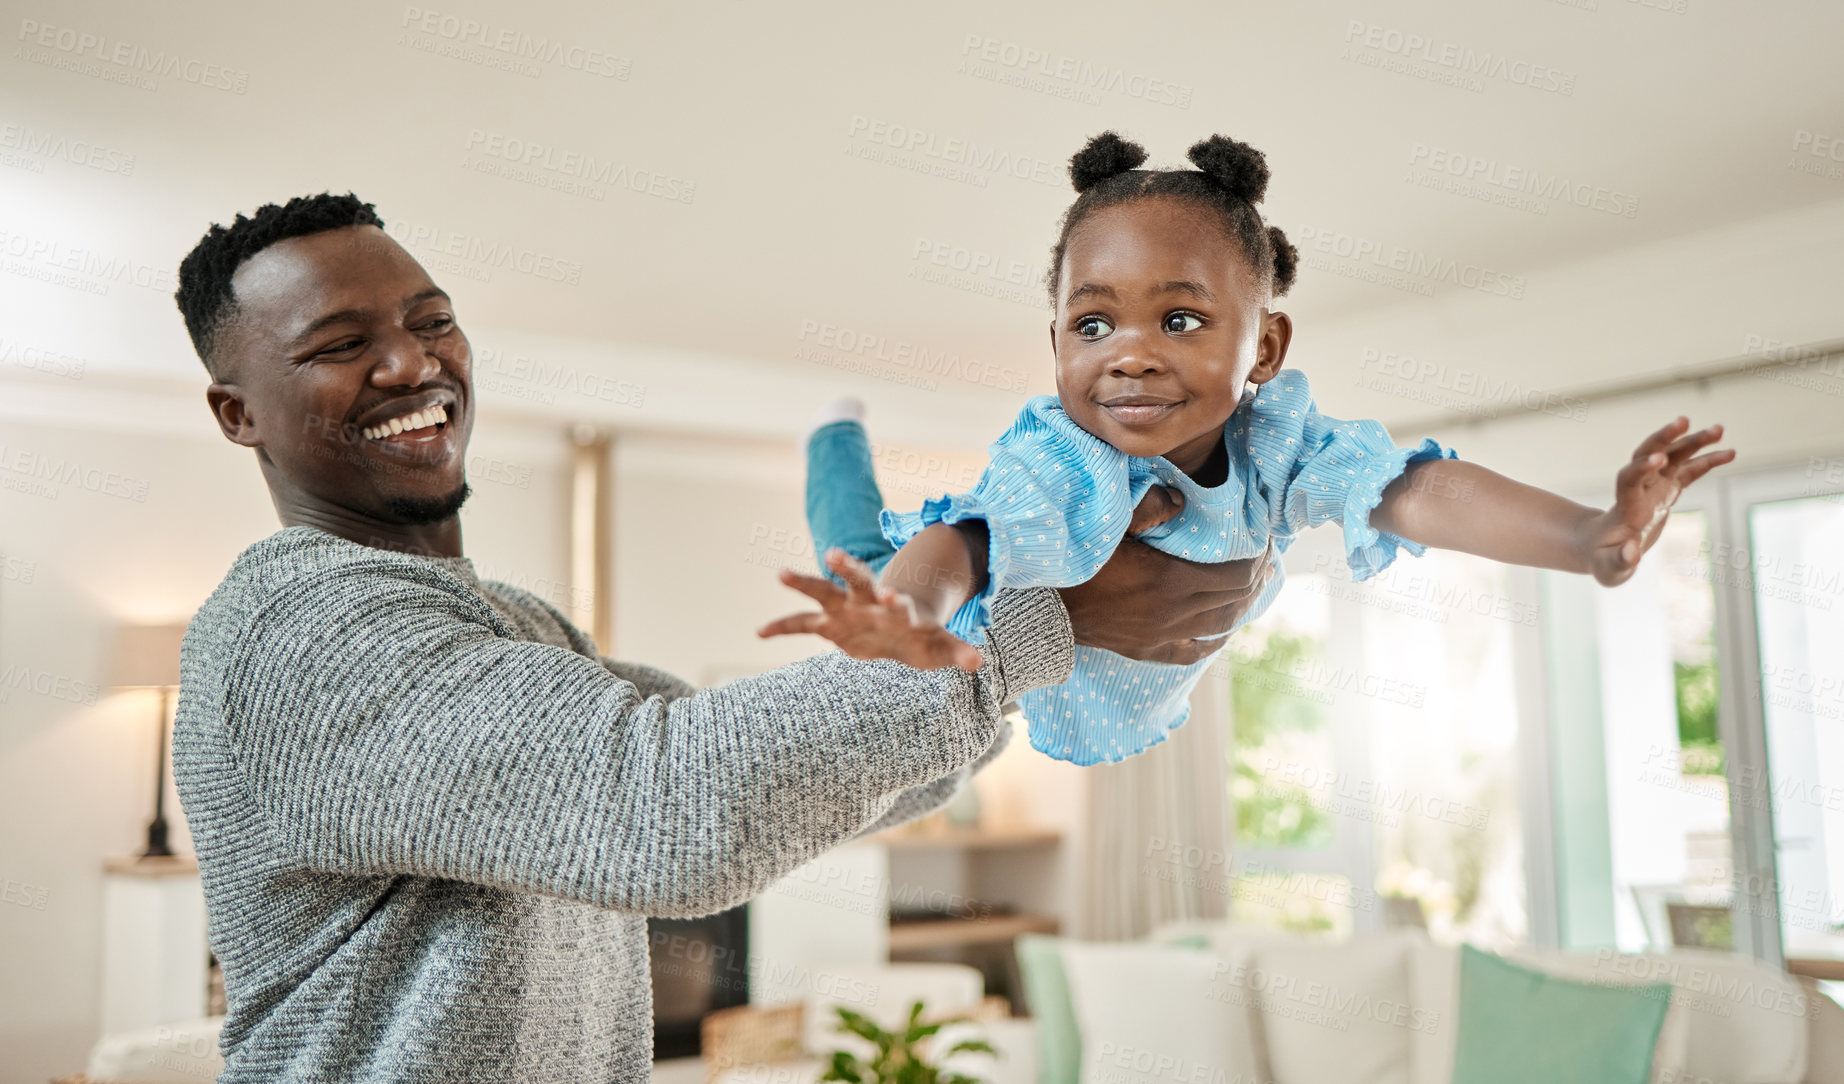 Buy stock photo Cropped shot of a handsome young man lifting is daughter high up in the air while playing in the living room at home